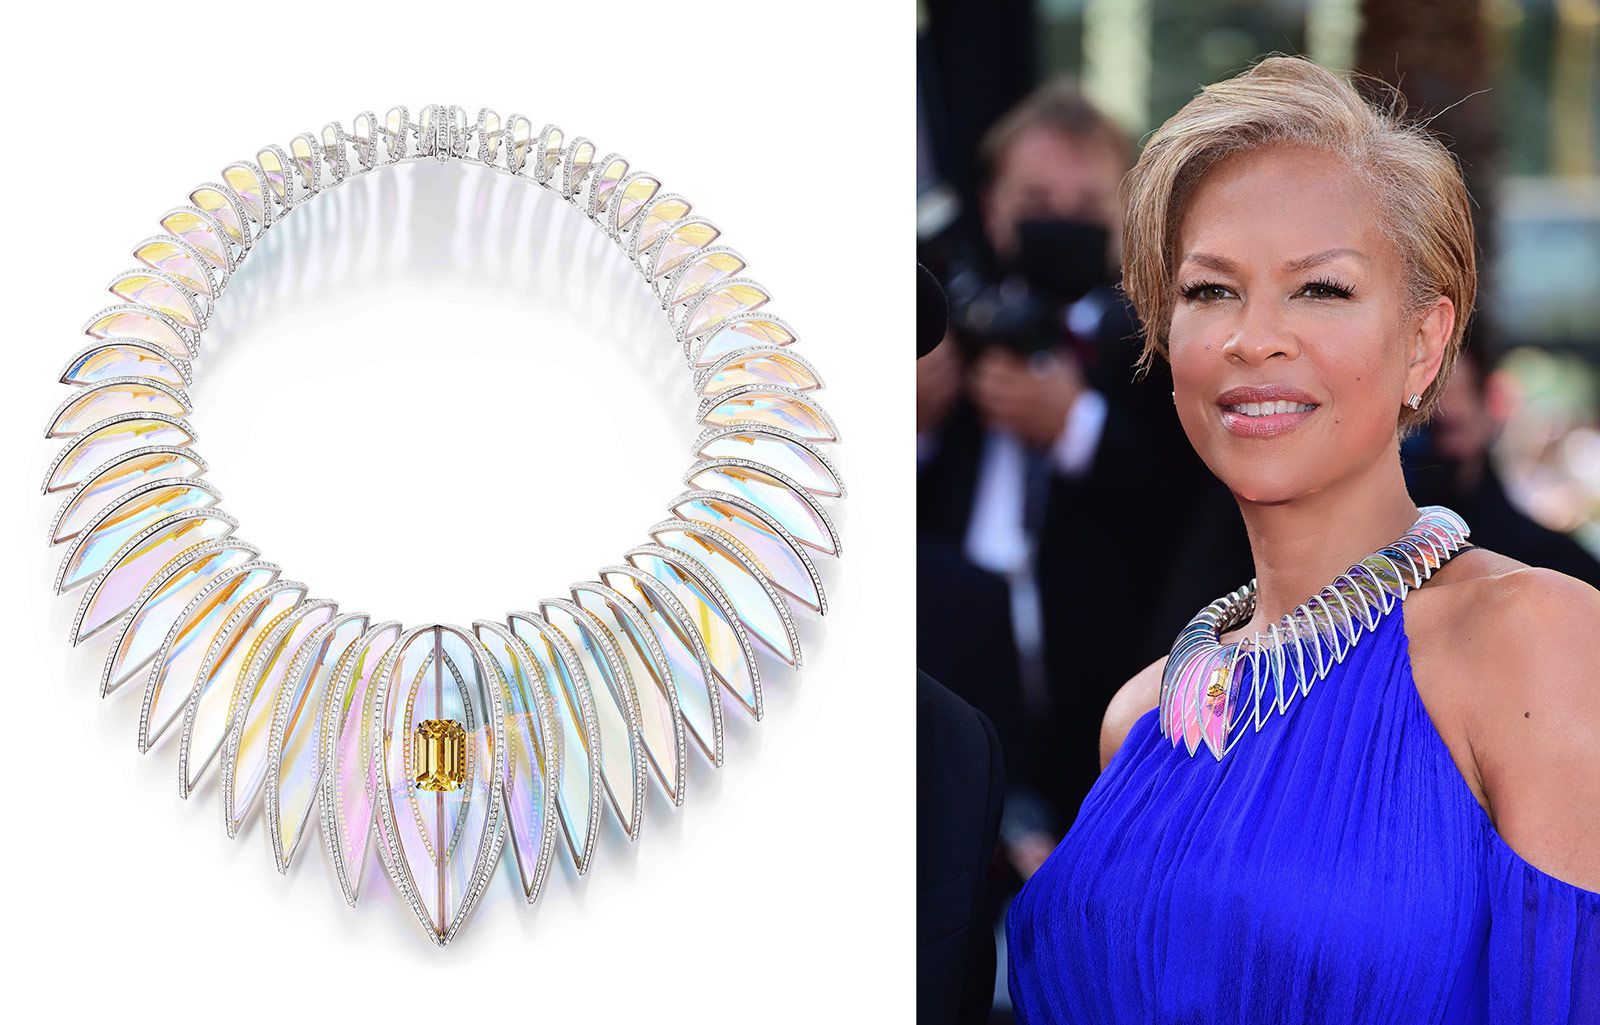 American film producer, Tonya Lewis Lee, wore the Boucheron Holographique High Jewellery necklace, set with a 20.21 carat yellow sapphire, holographic rock crystal and diamonds to the Cannes Film Festival 2021